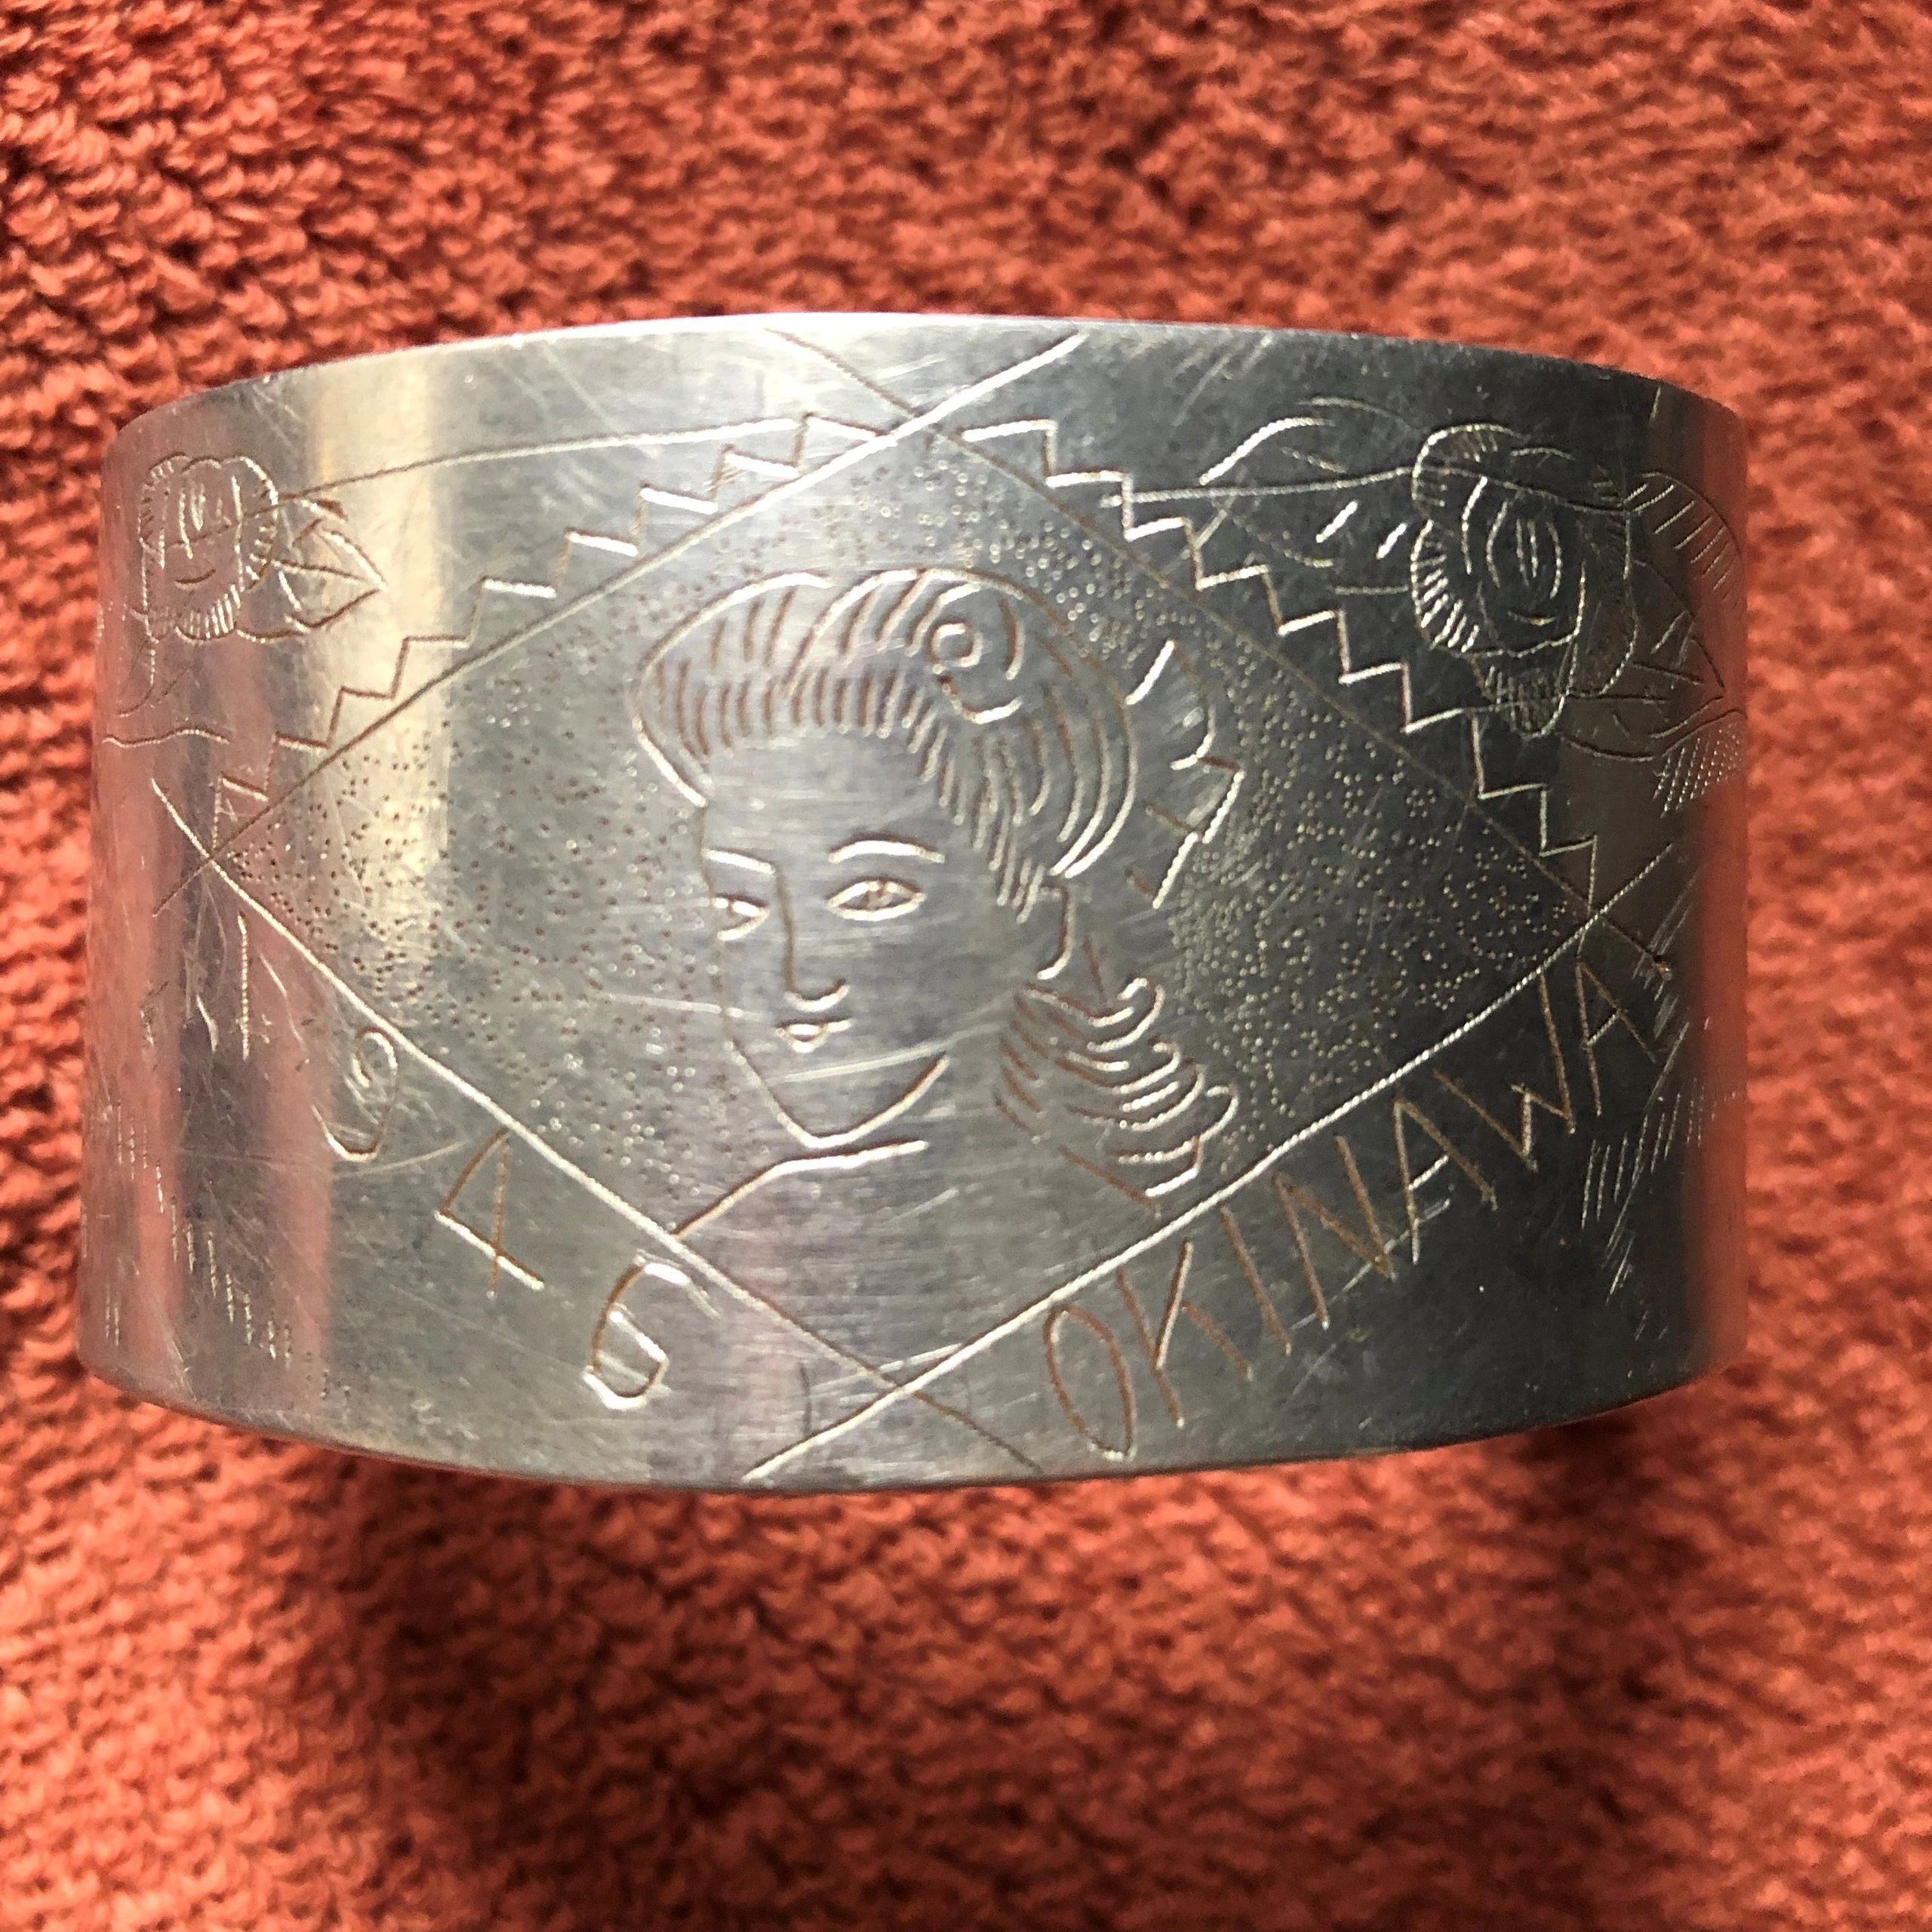 A cuff bracelet made of aluminum from a downed Japanese plane, crafted by an Okinawan.